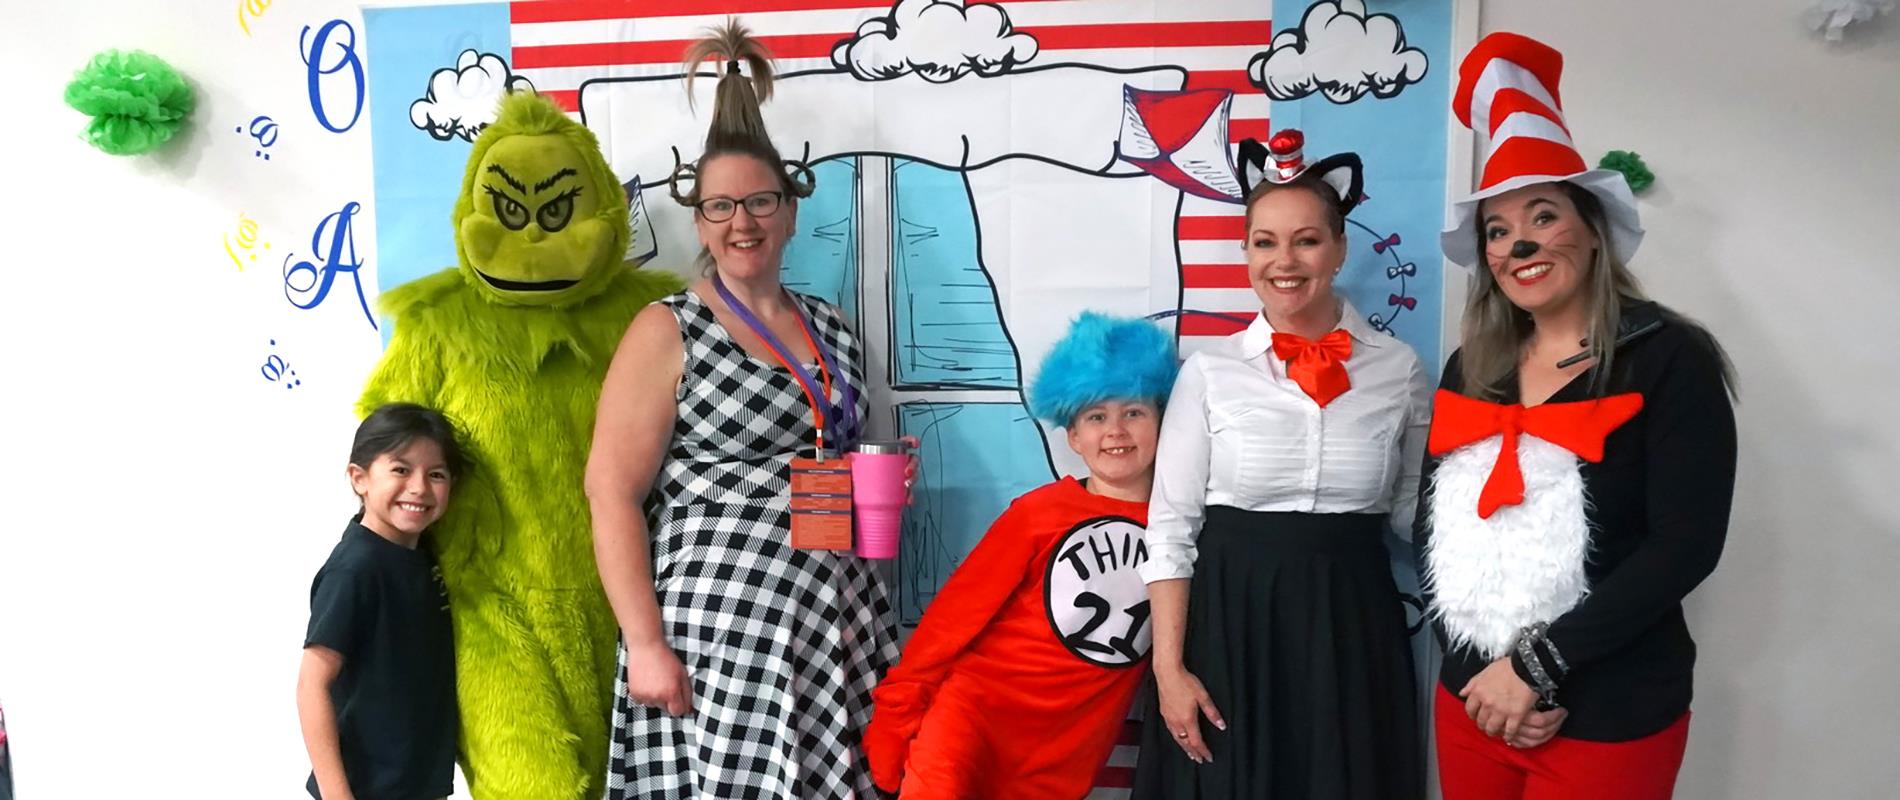 staff and students show off outfits for Dr. Seuss day